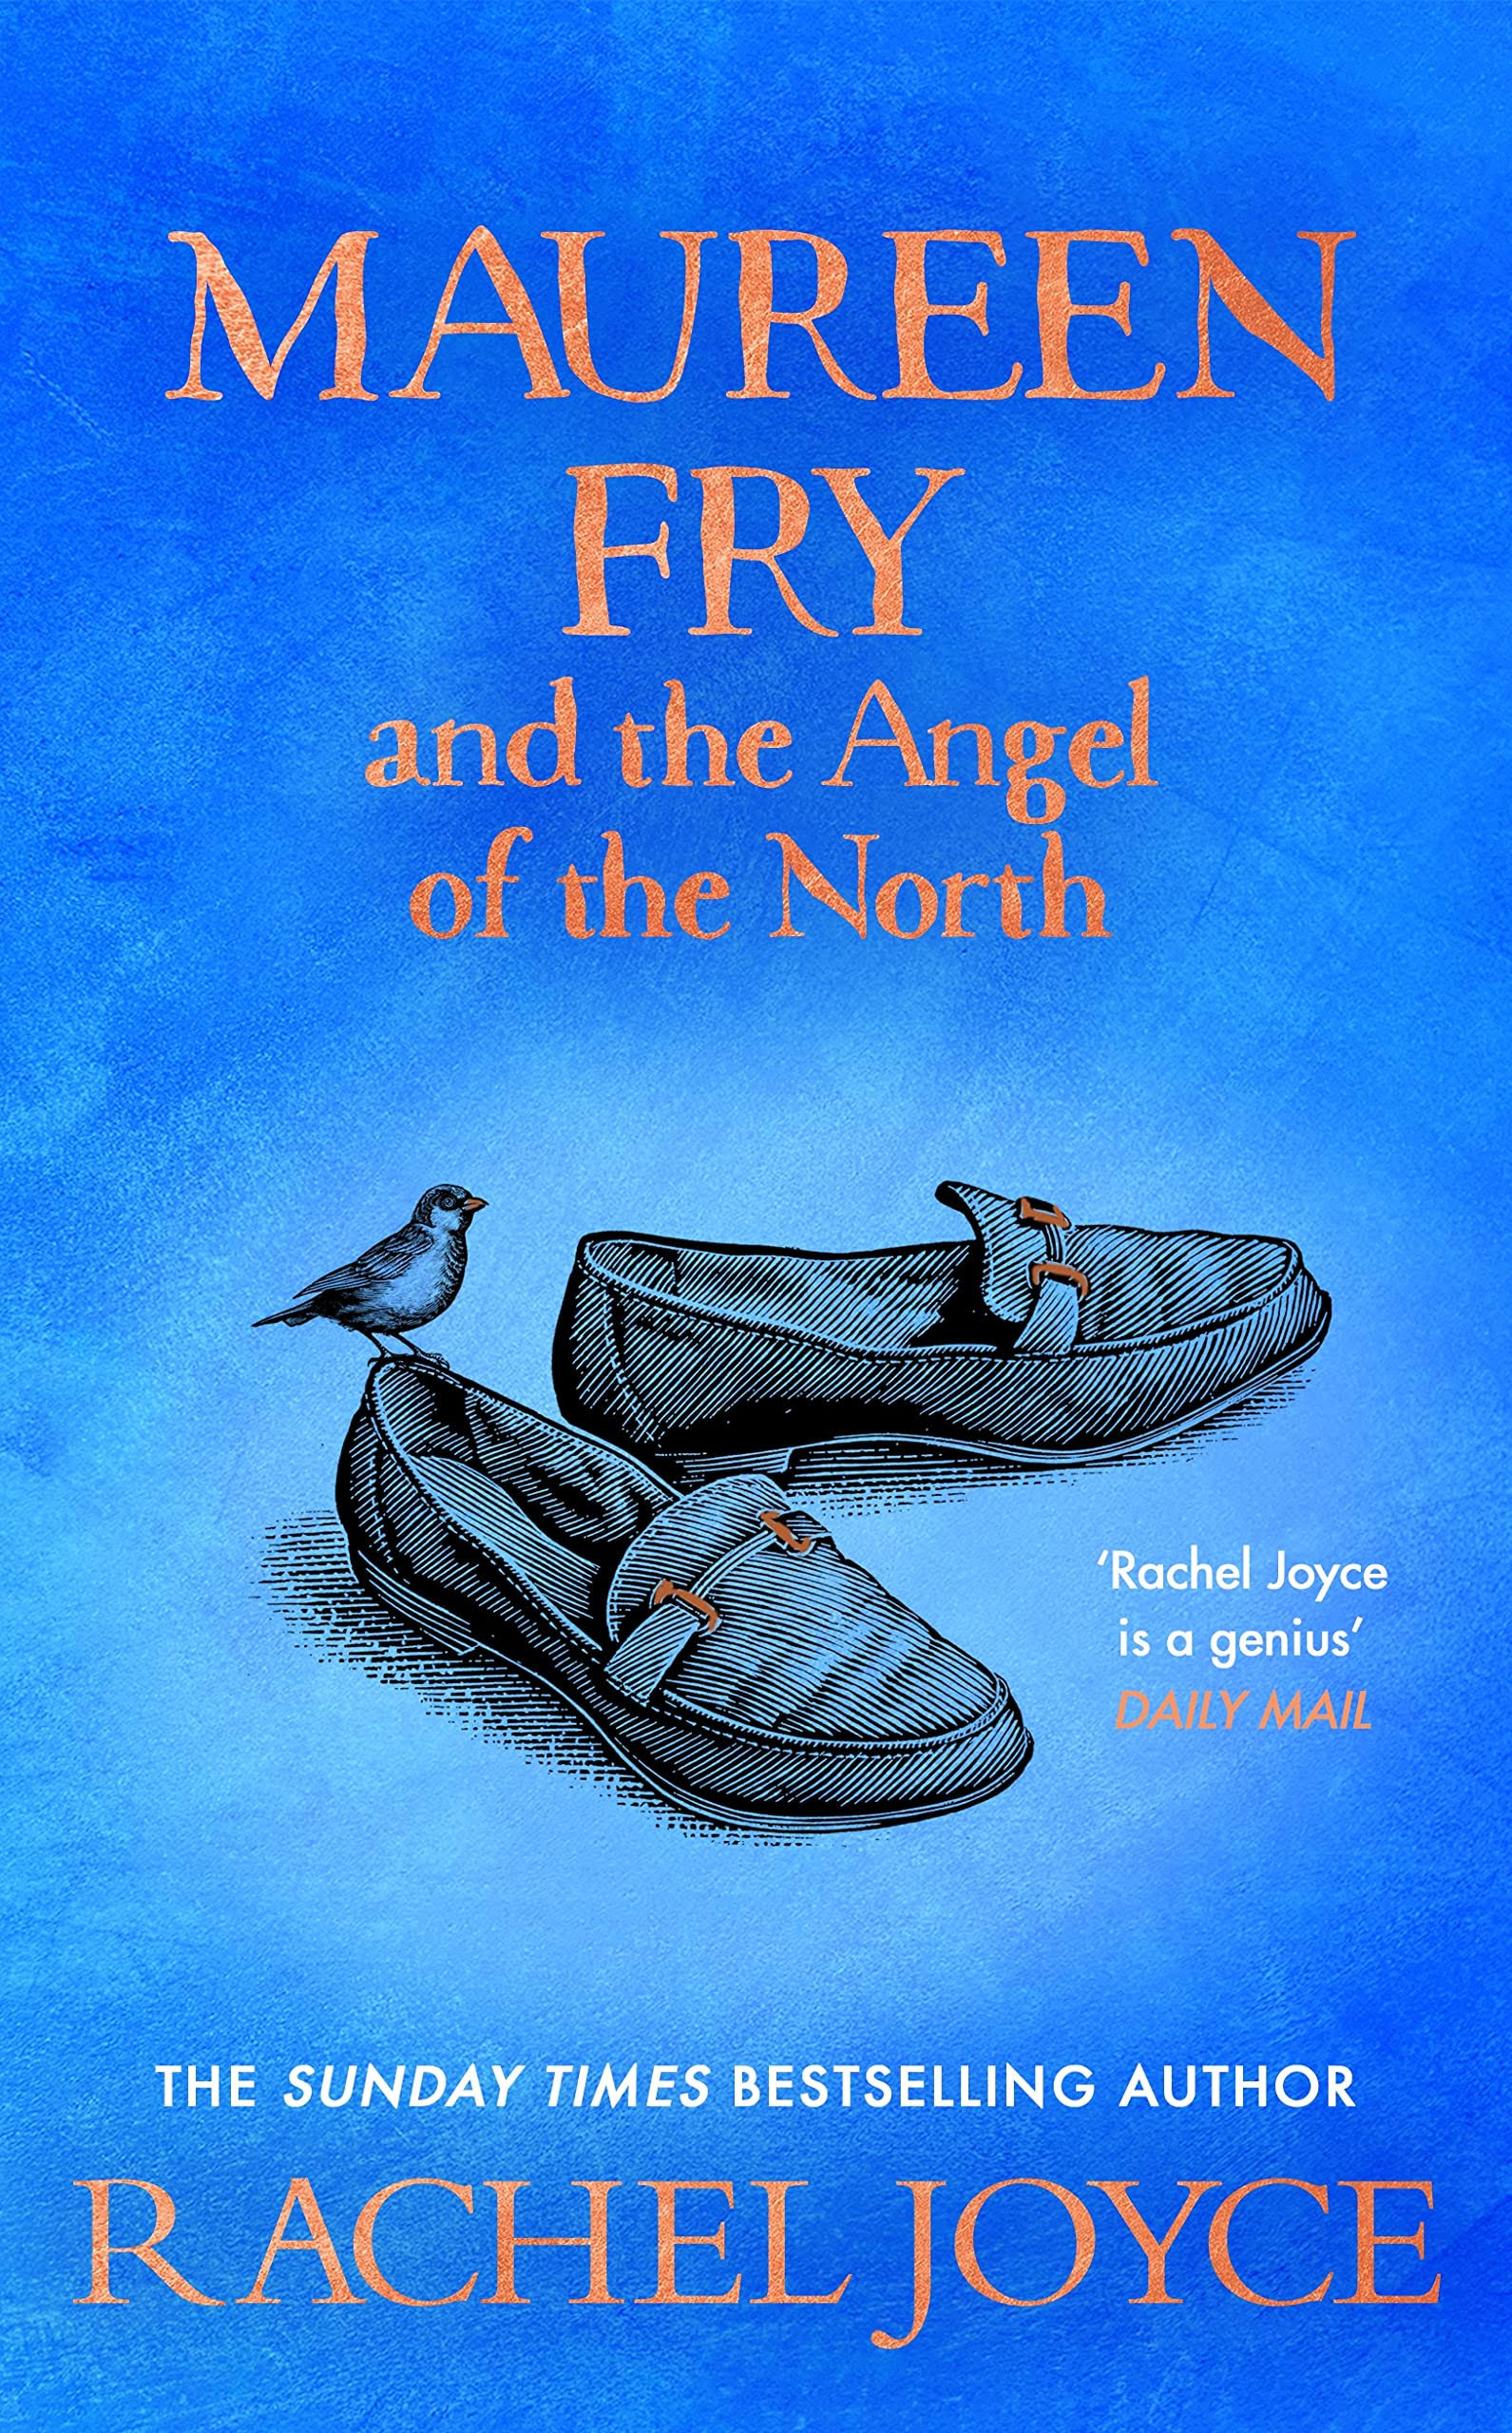 Maureen Fry and The Angel of The North by Rachel Joyce